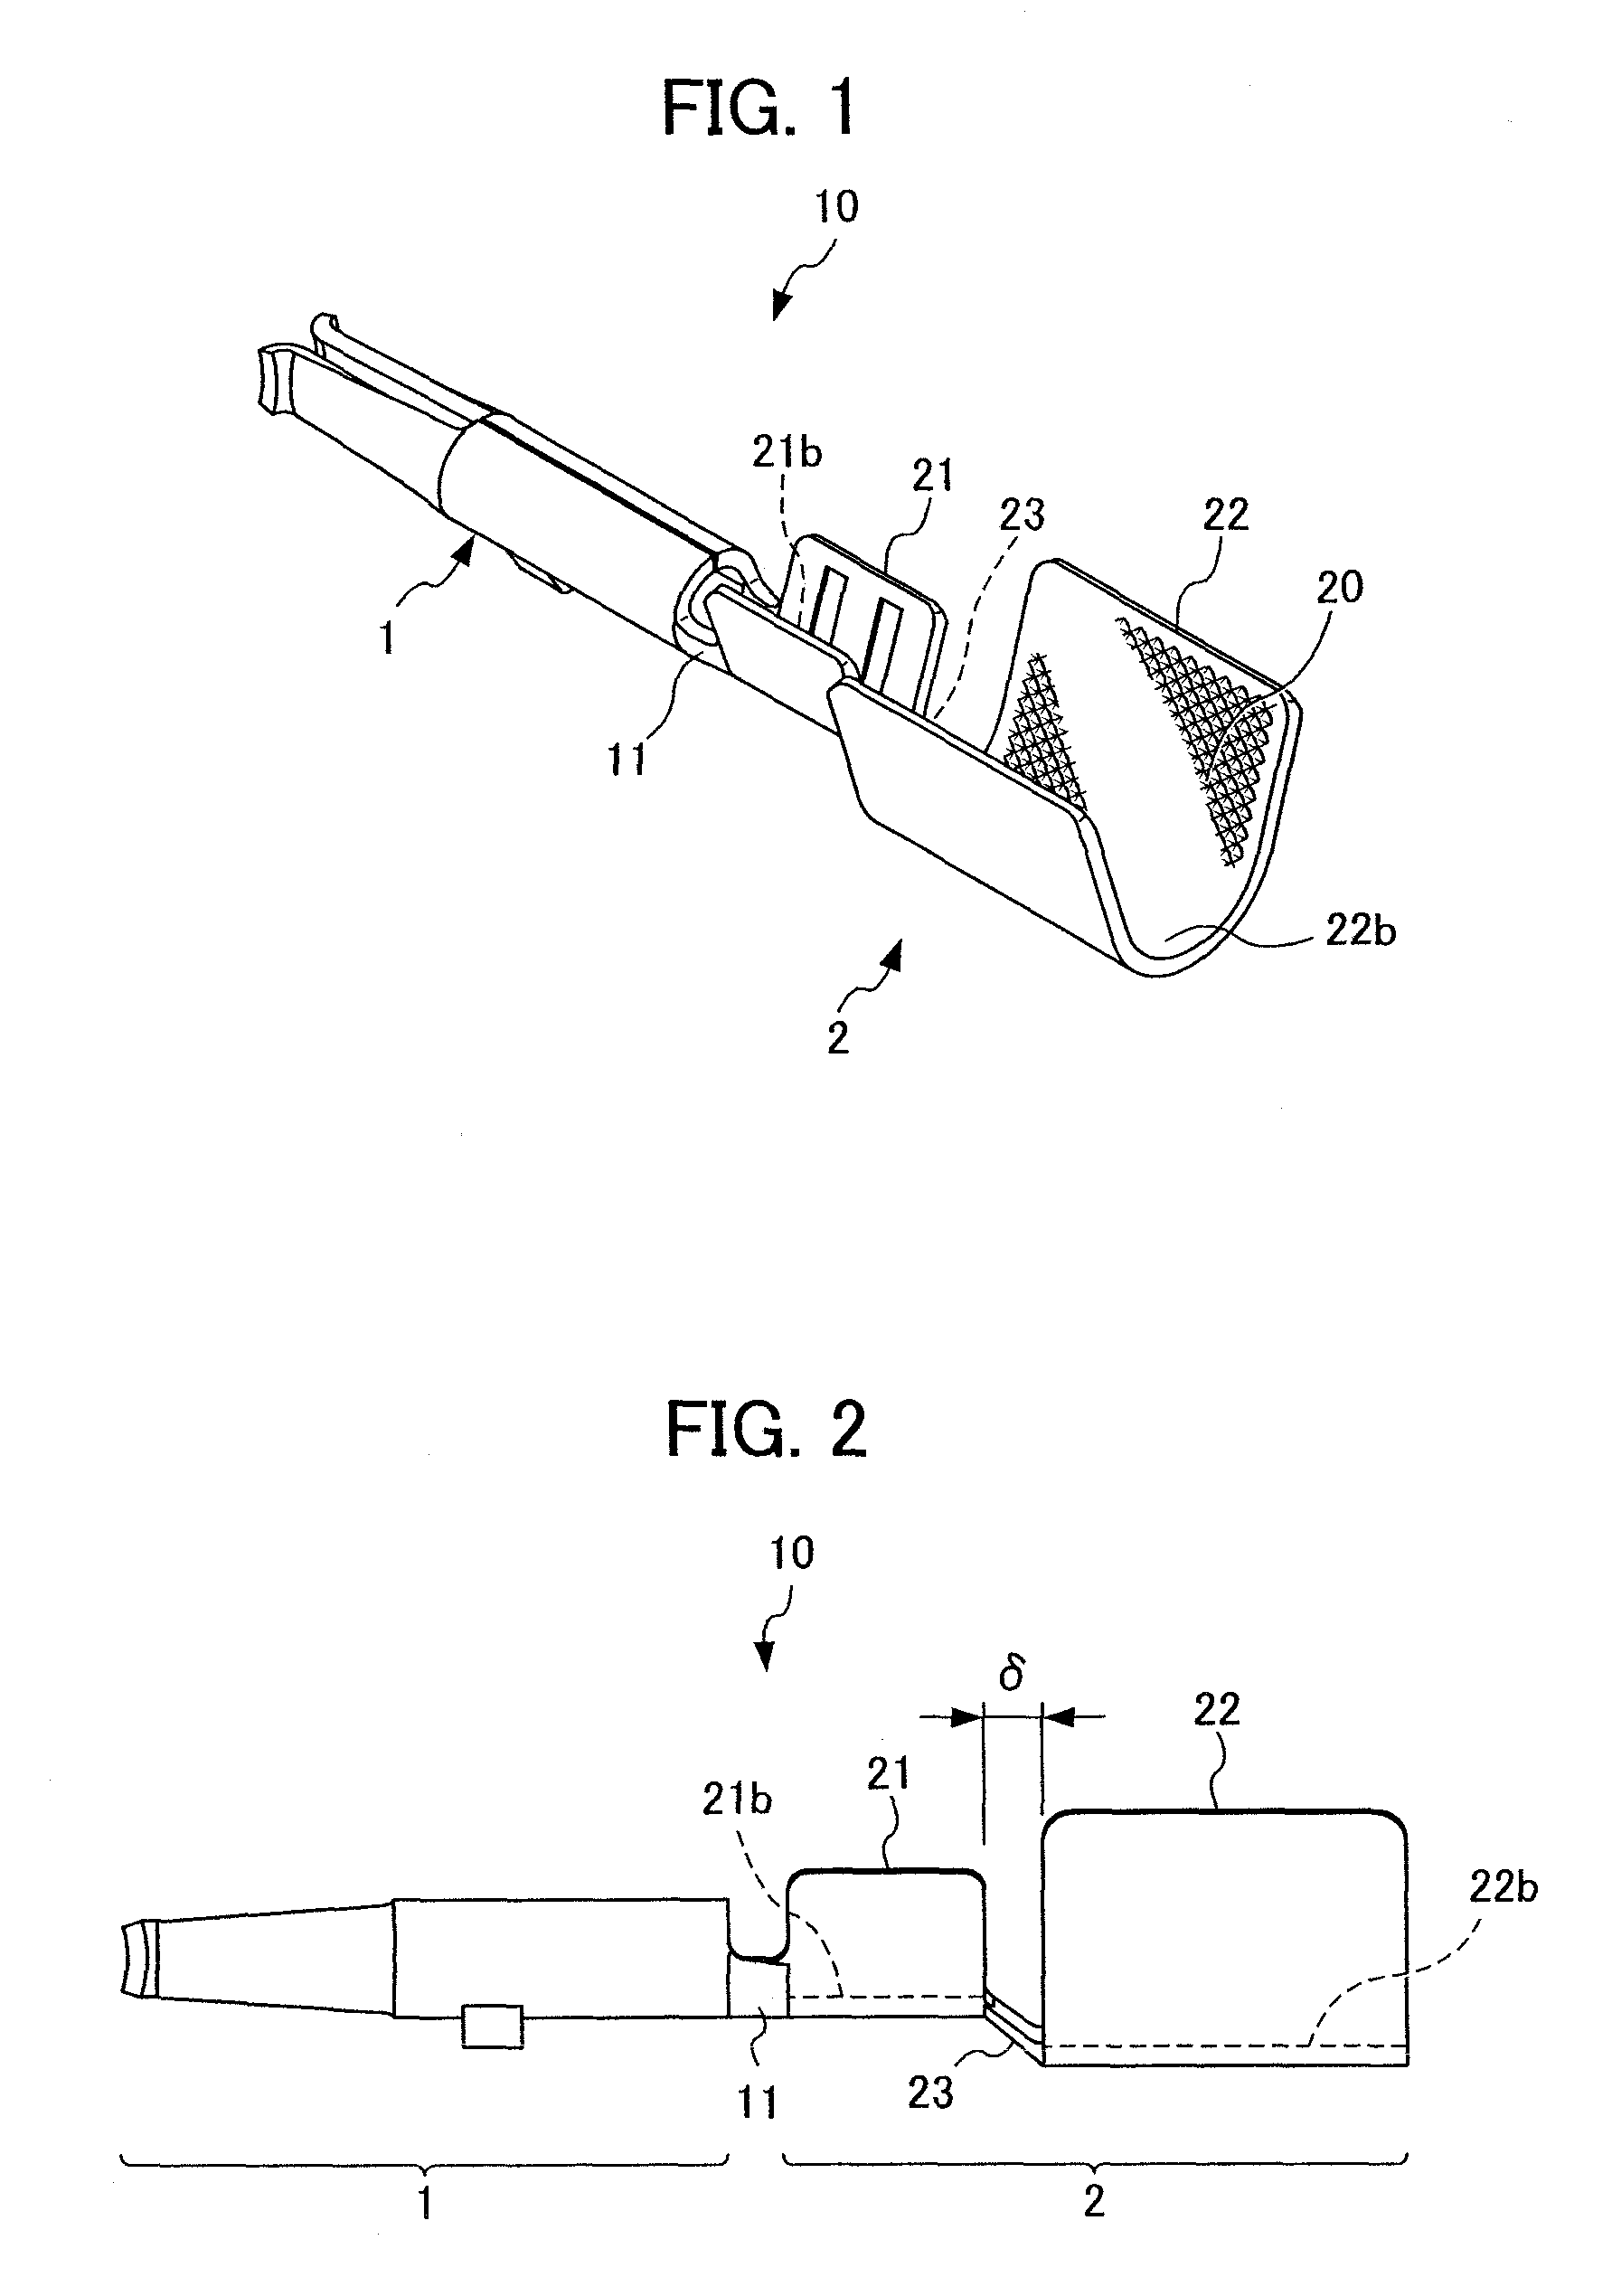 Contact for coaxiable cable having a tearable band between a conductor barrel and a crimp barrel